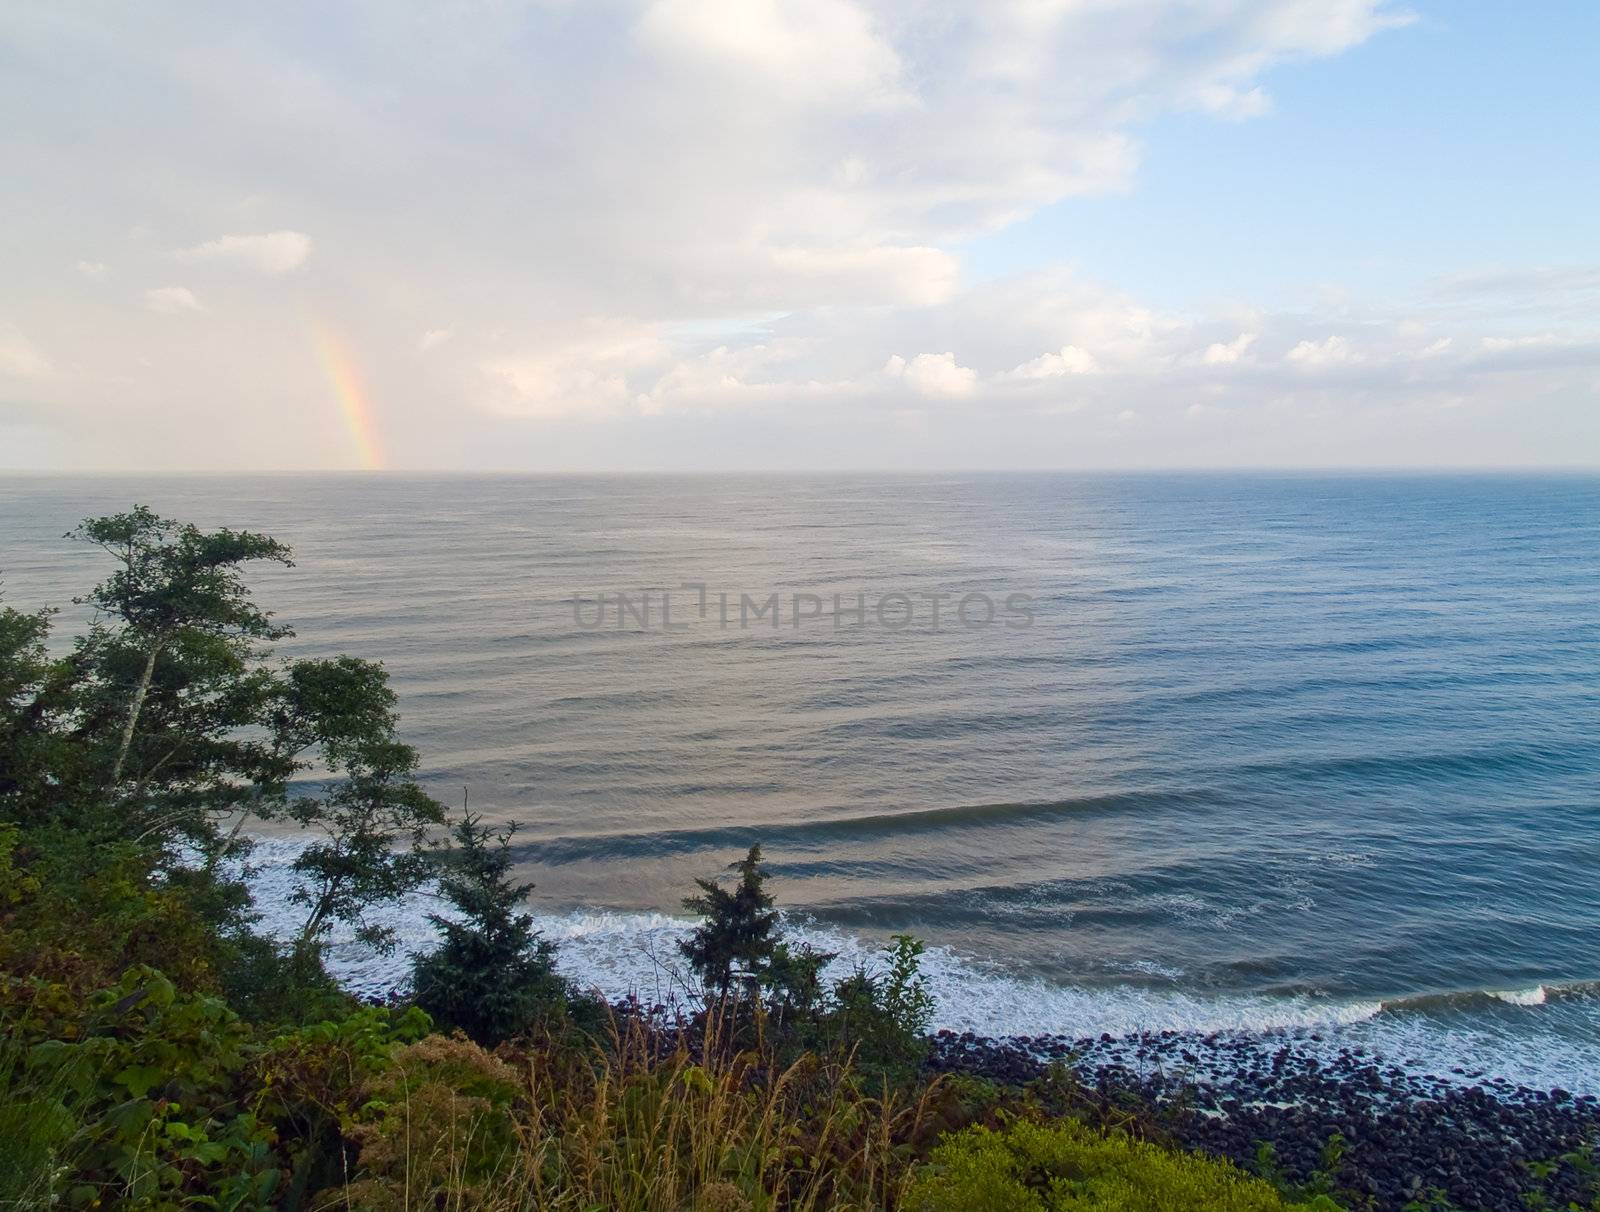 Rainbow Over the Ocean with a Partly Cloudy Sky by Frankljunior